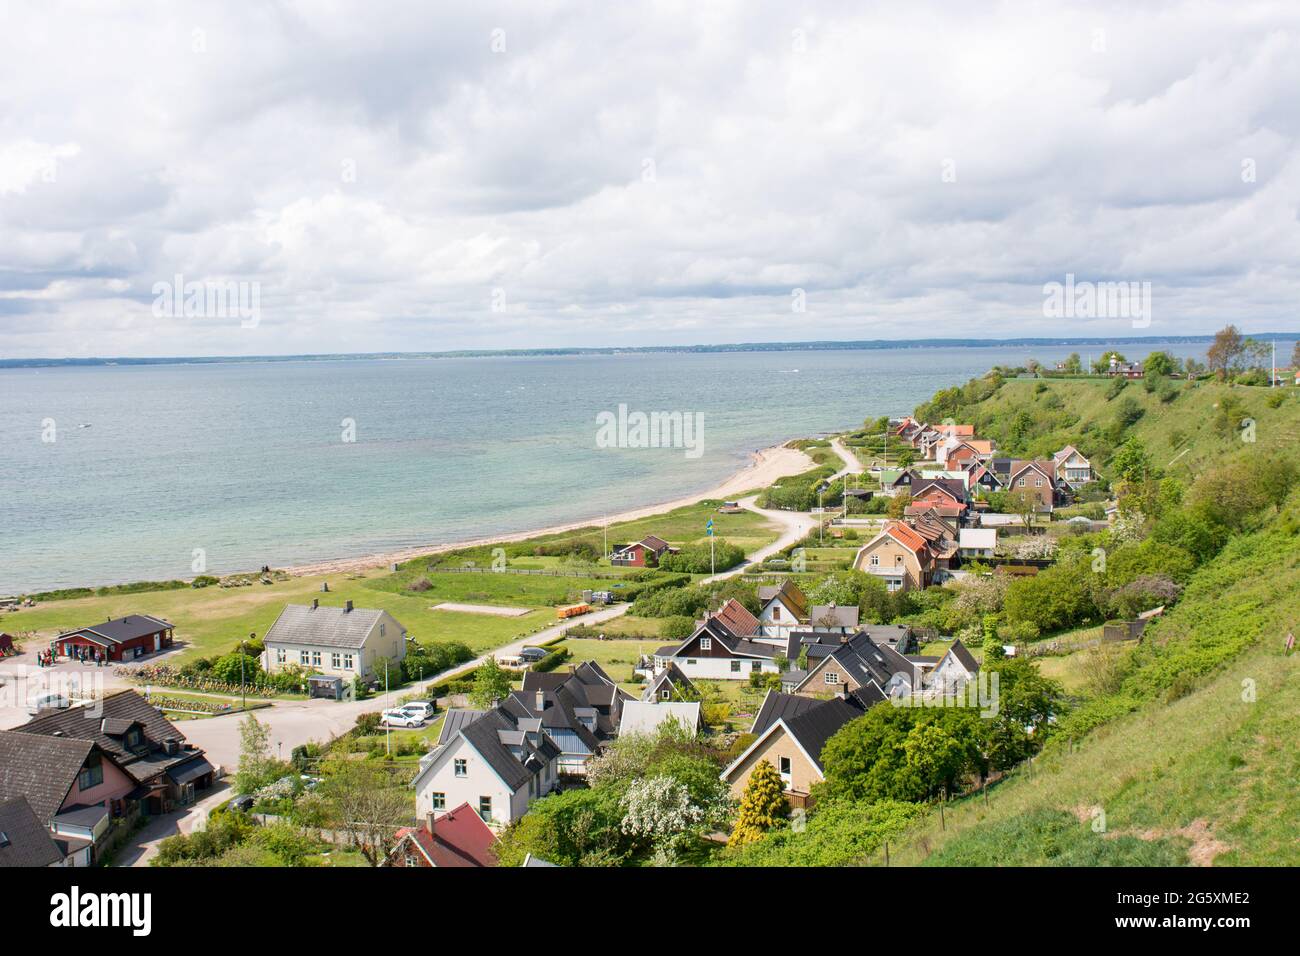 Coastline of the island Ven as seen from Ibbs church with houses and view towards Denmark Stock Photo